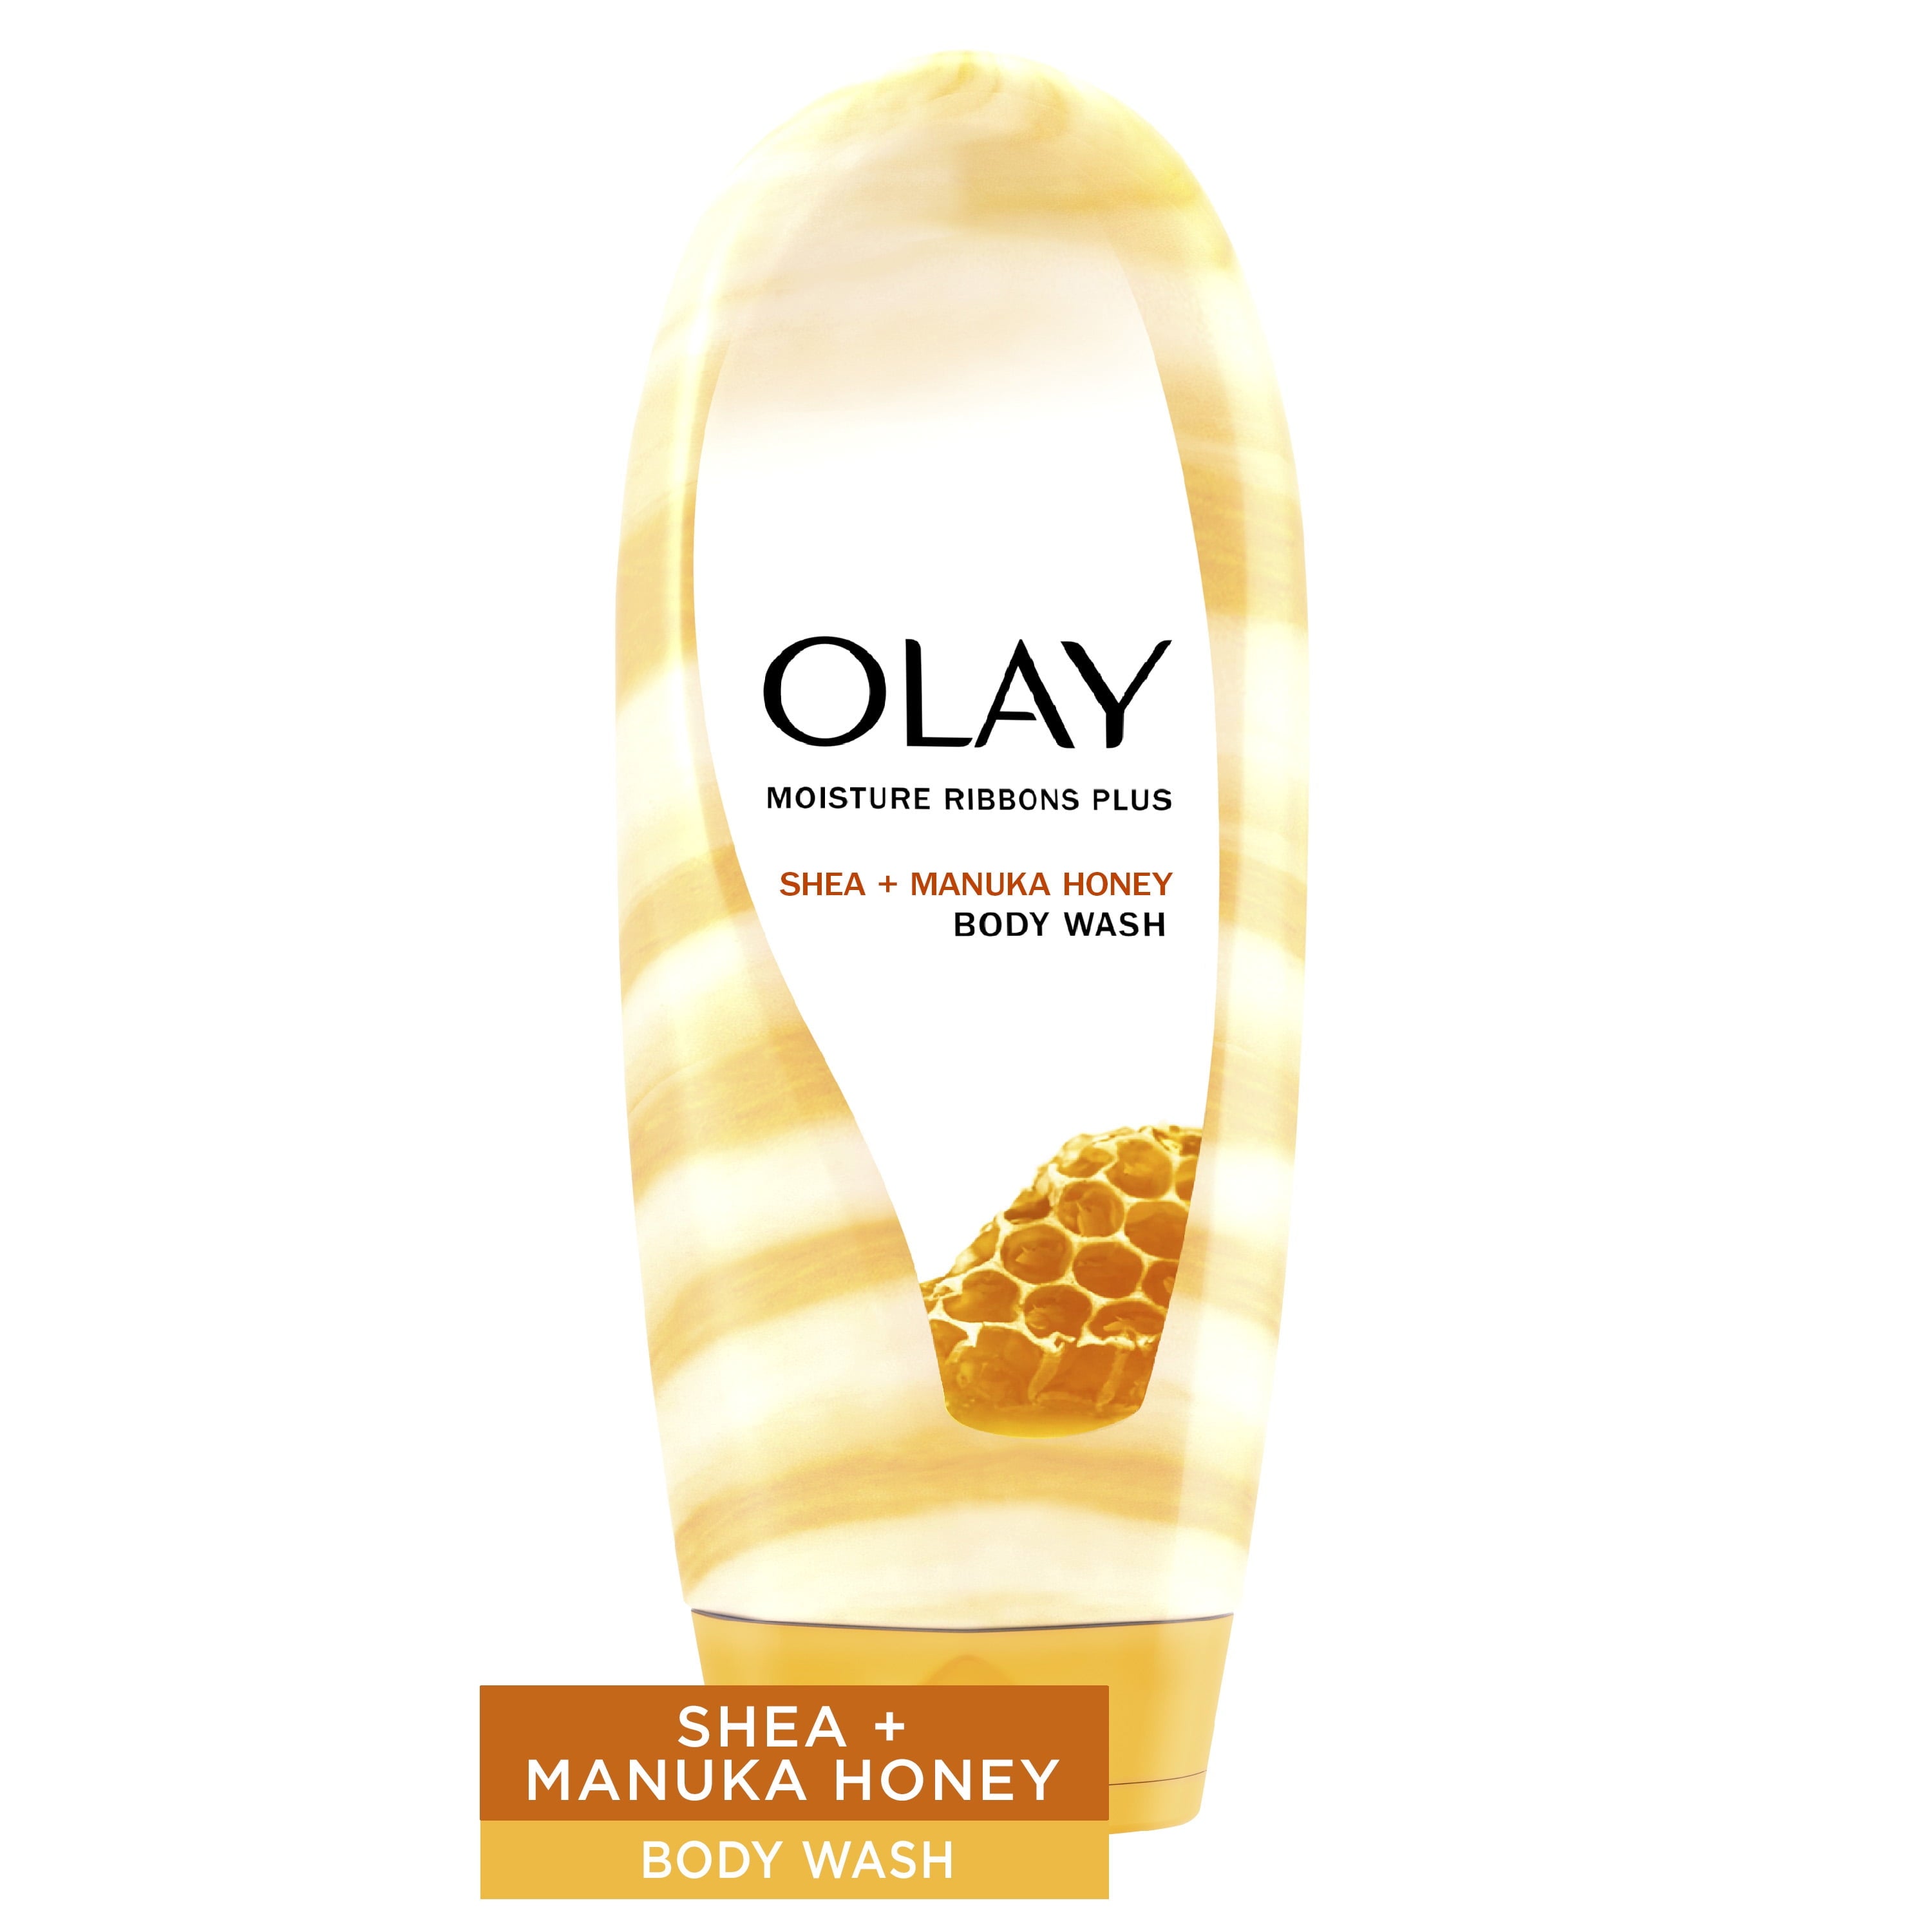 Wholesale prices with free shipping all over United States Olay Moisture Ribbons Plus Shea and Manuka Honey Body Wash, 18 fl oz - Steven Deals